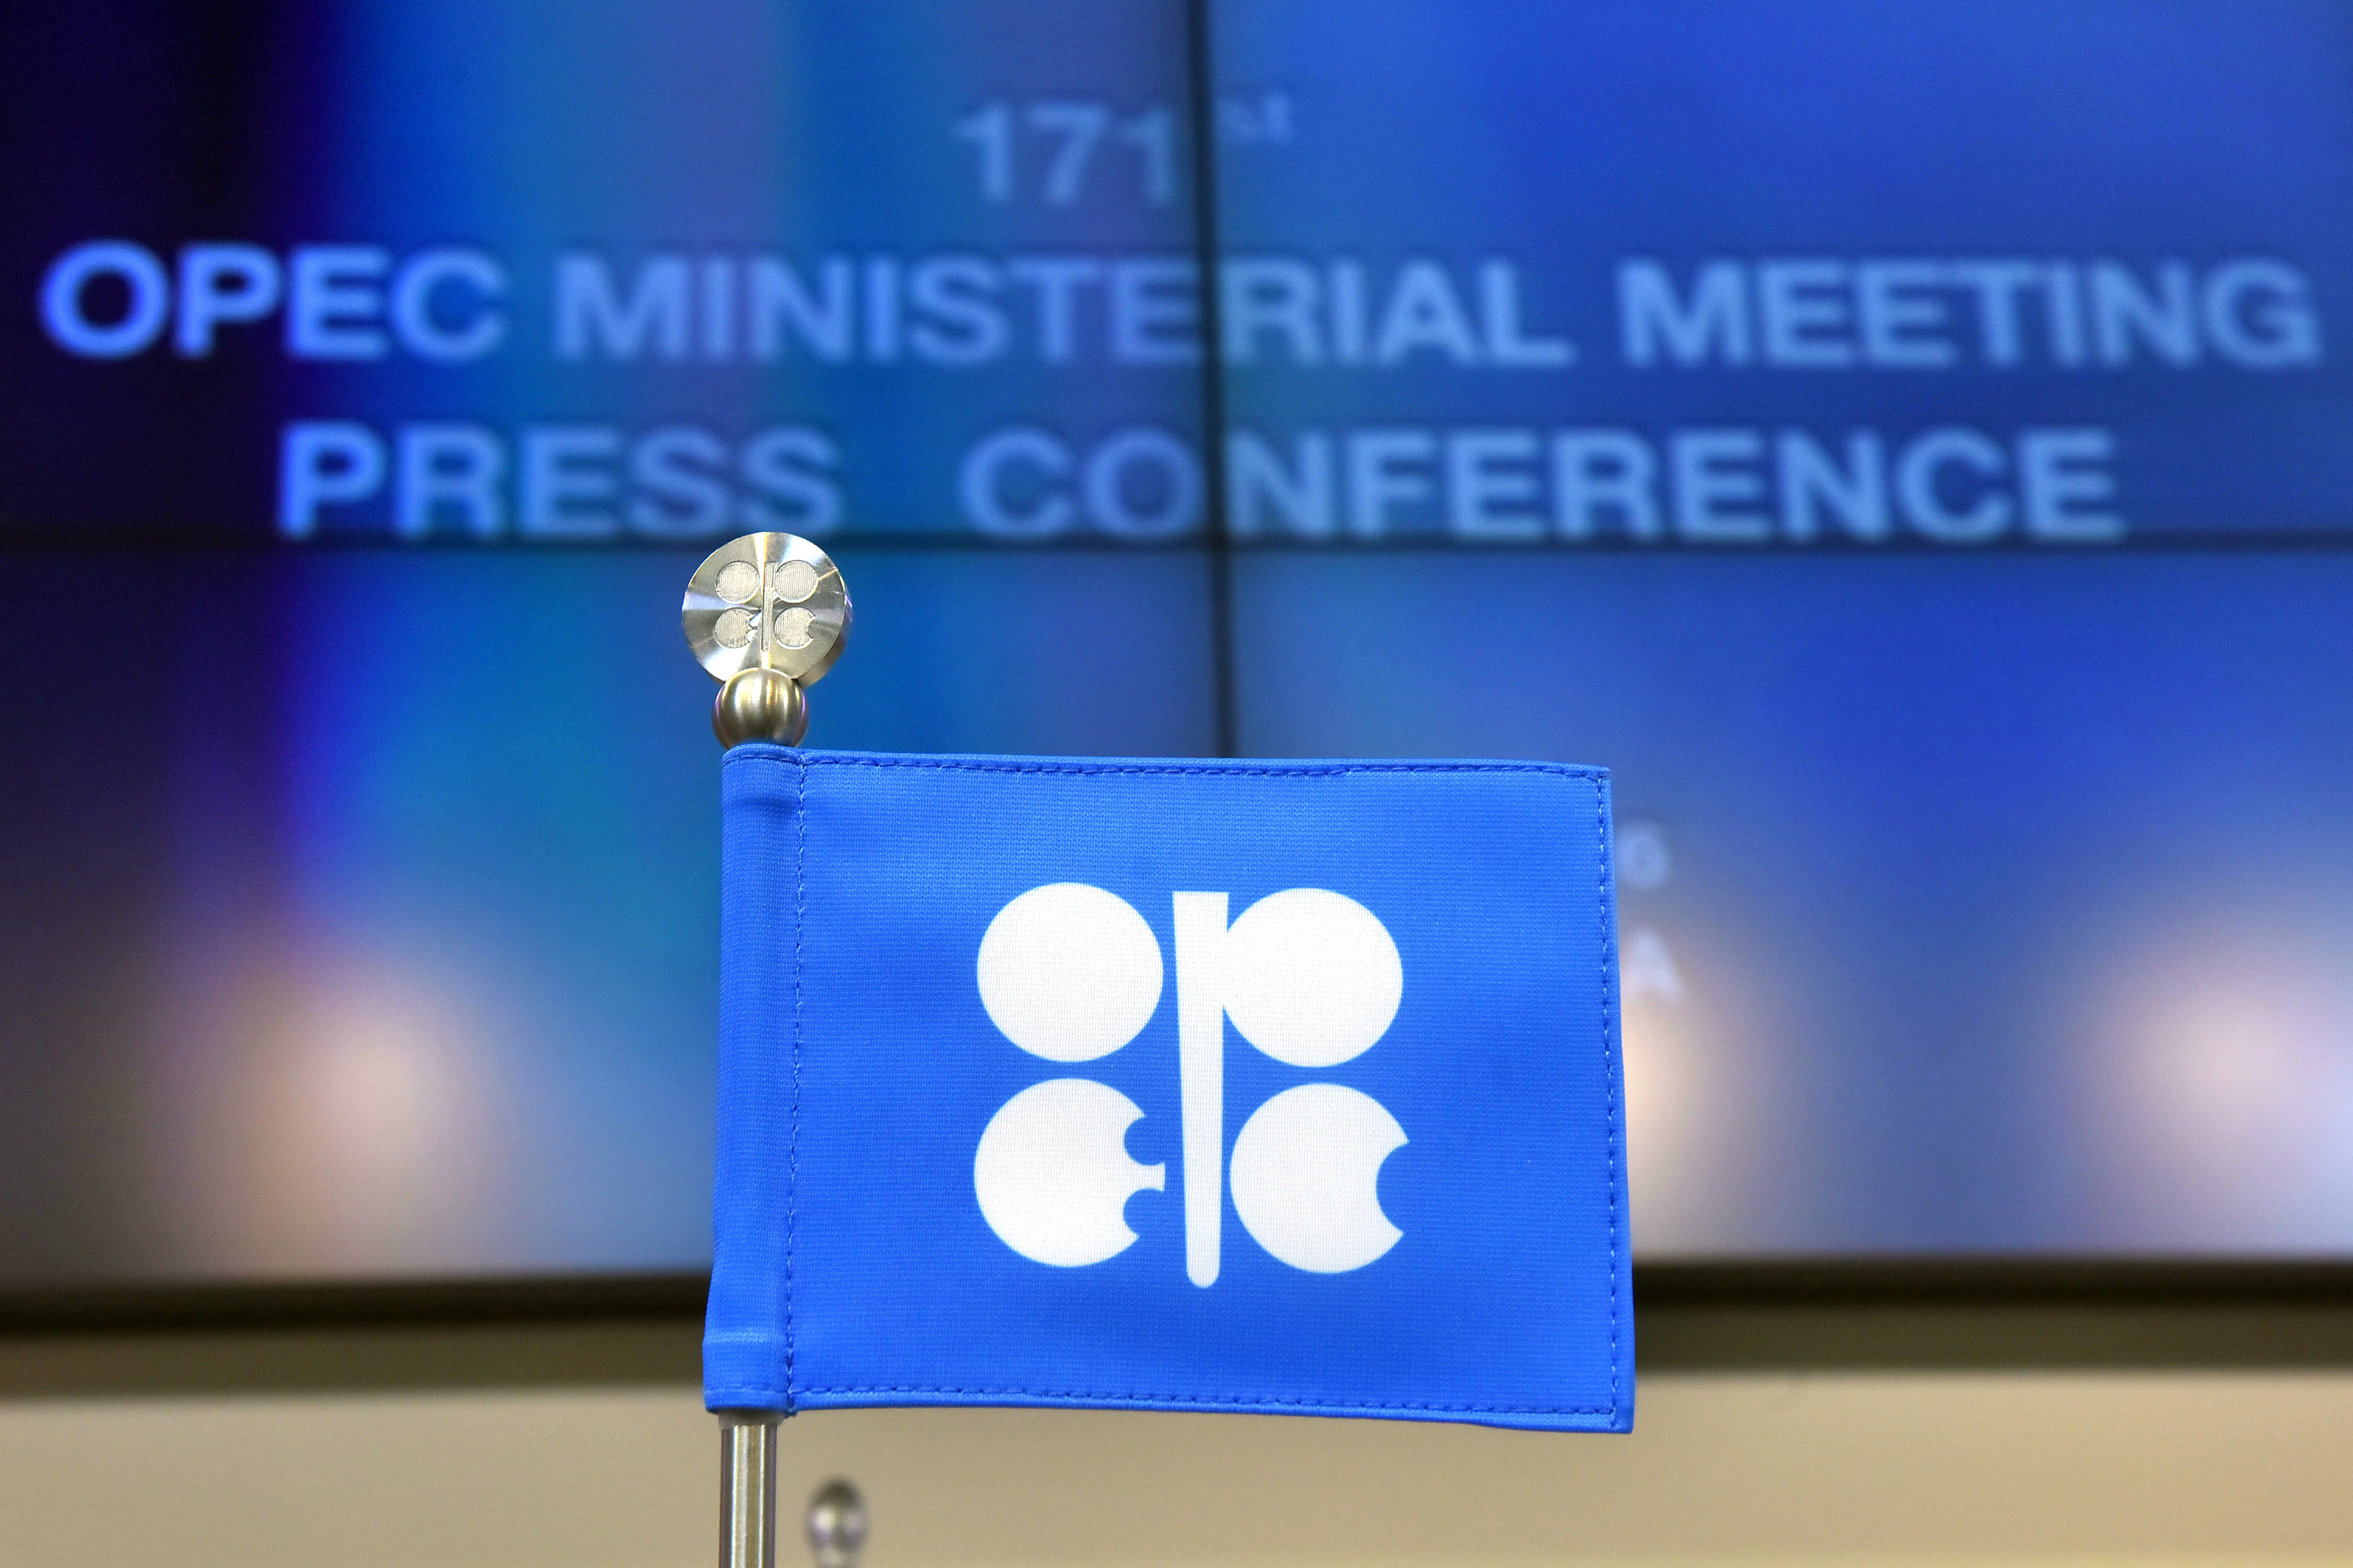 An OPEC branded flag sits on a table ahead of the 171st Organization of Petroleum Exporting Countries (OPEC) meeting in Vienna, Austria, on Wednesday, Nov. 30, 2016. (Akos Stiller&mdash;Bloomberg /Getty Images)